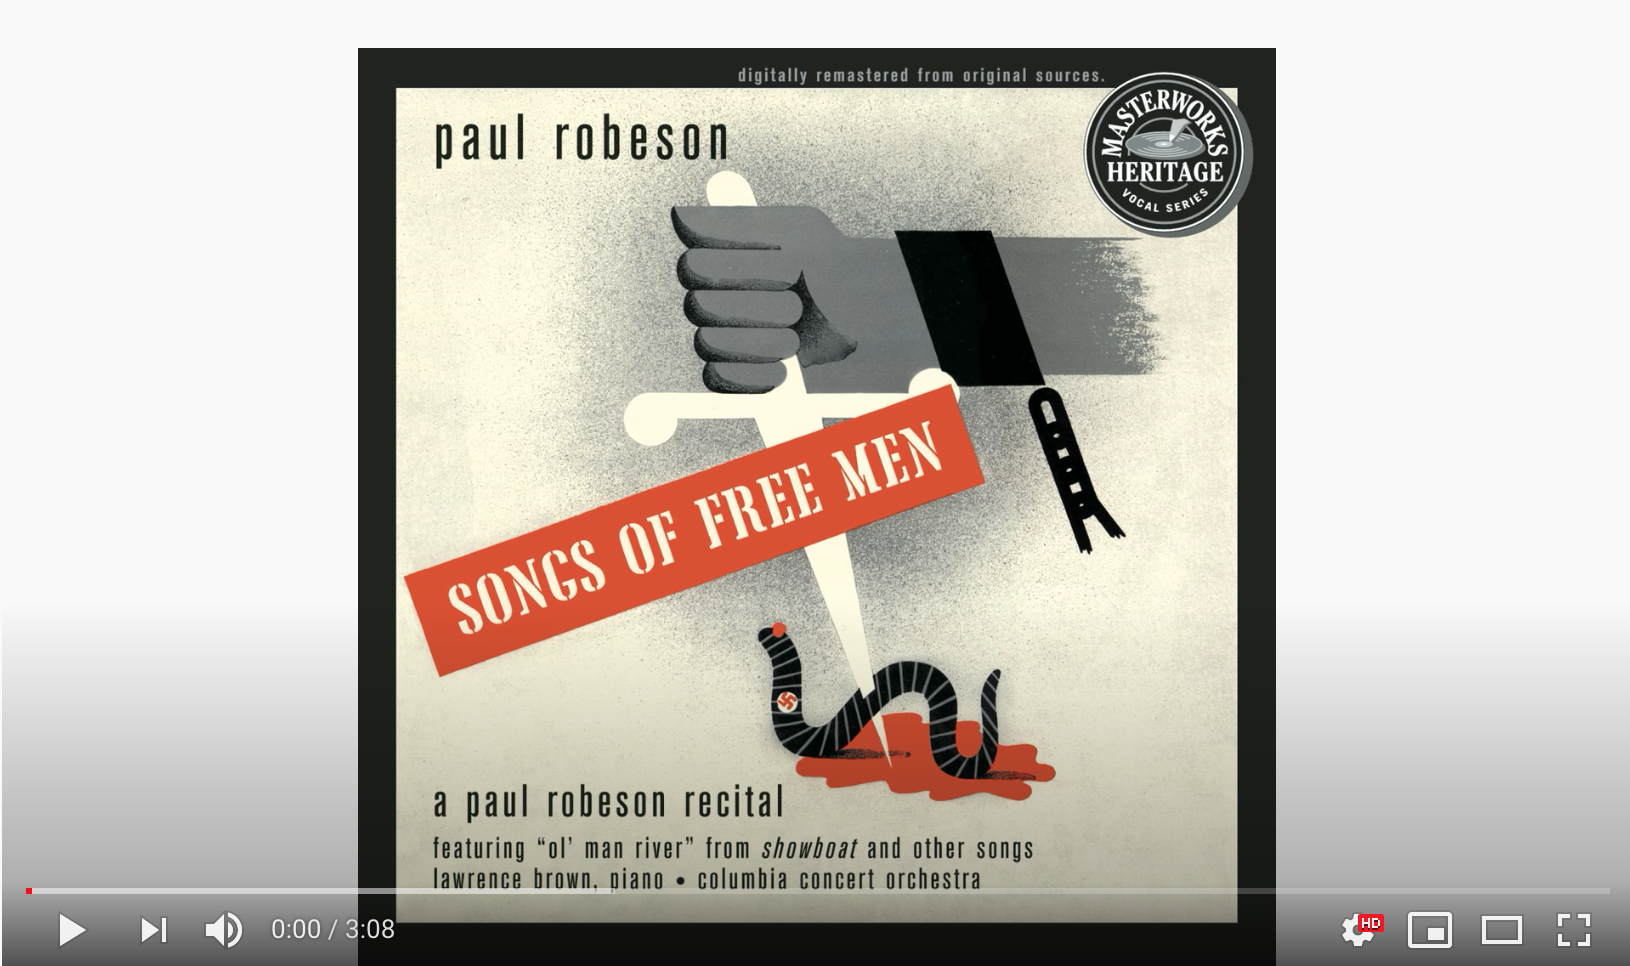 "The House I Live In" by Paul Robeson  